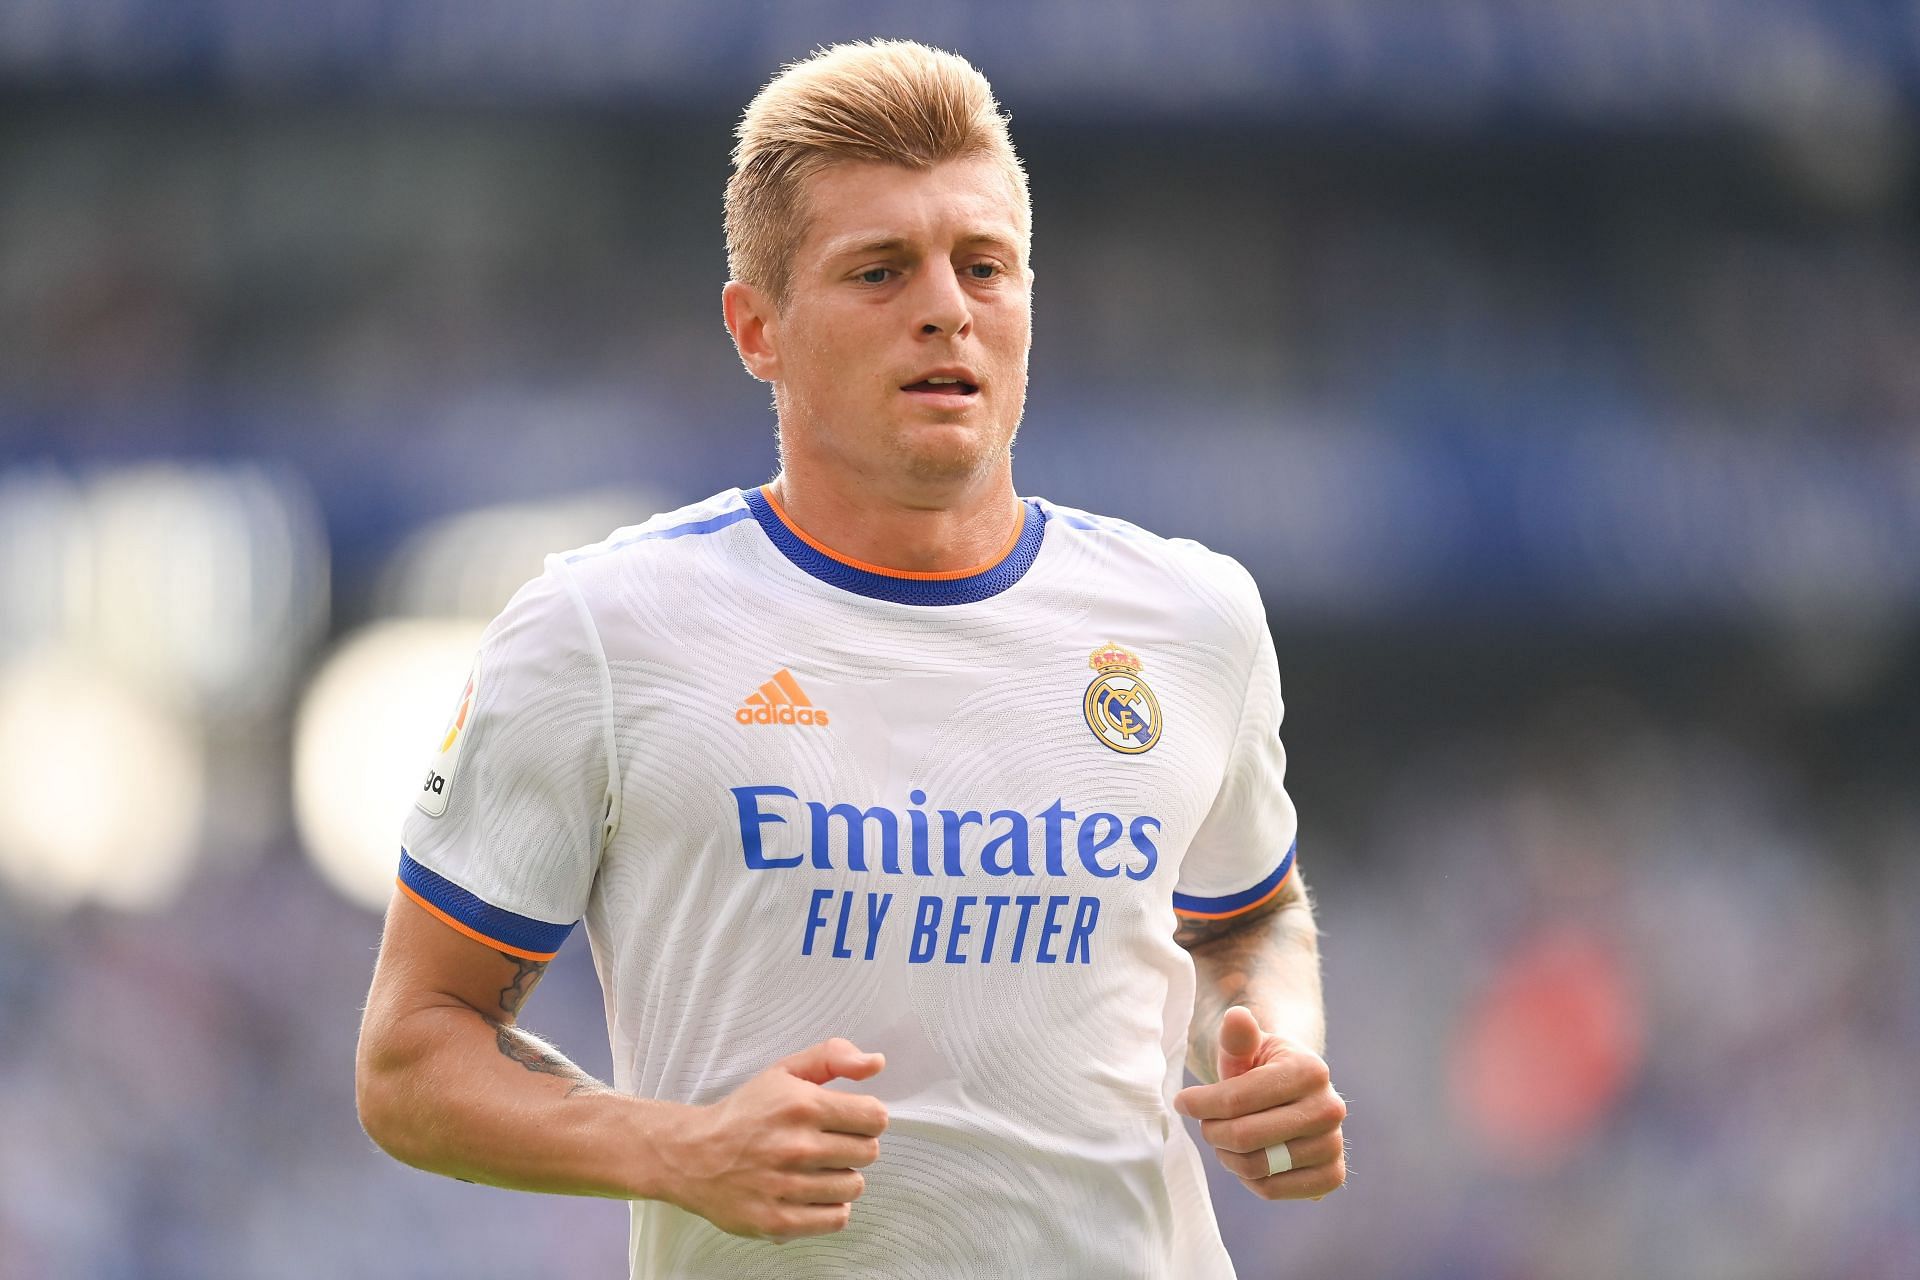 Toni Kroos picked up two first-half assists against Granada